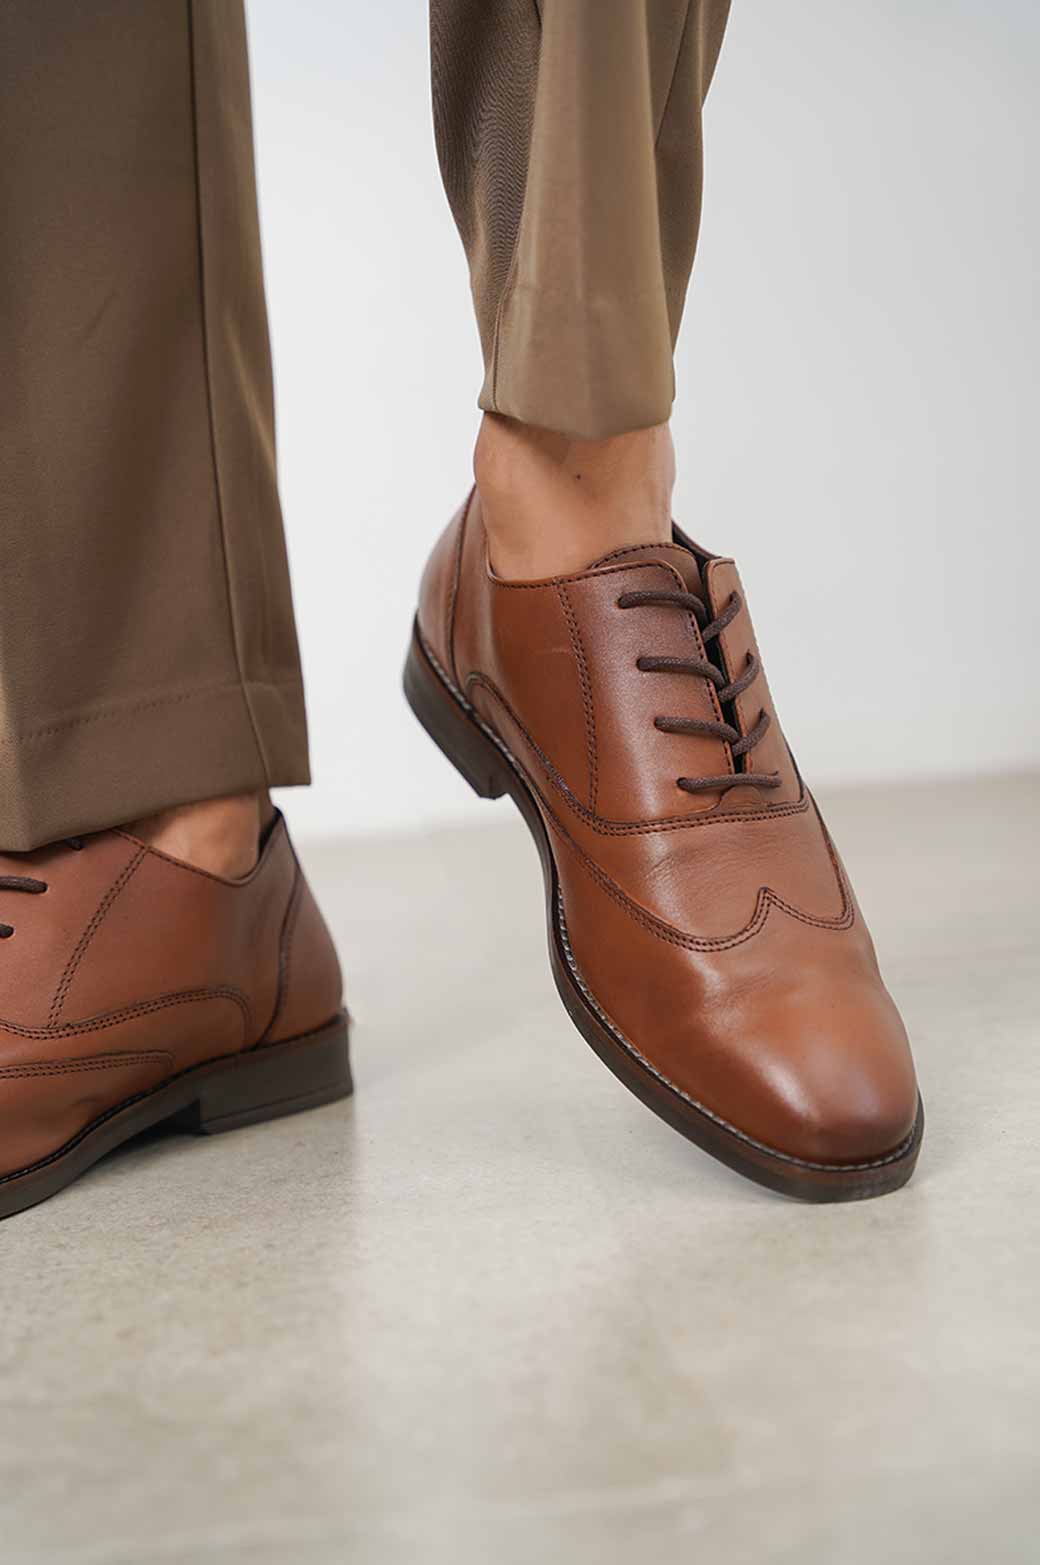 BROWN WING TIP LEATHER SHOES